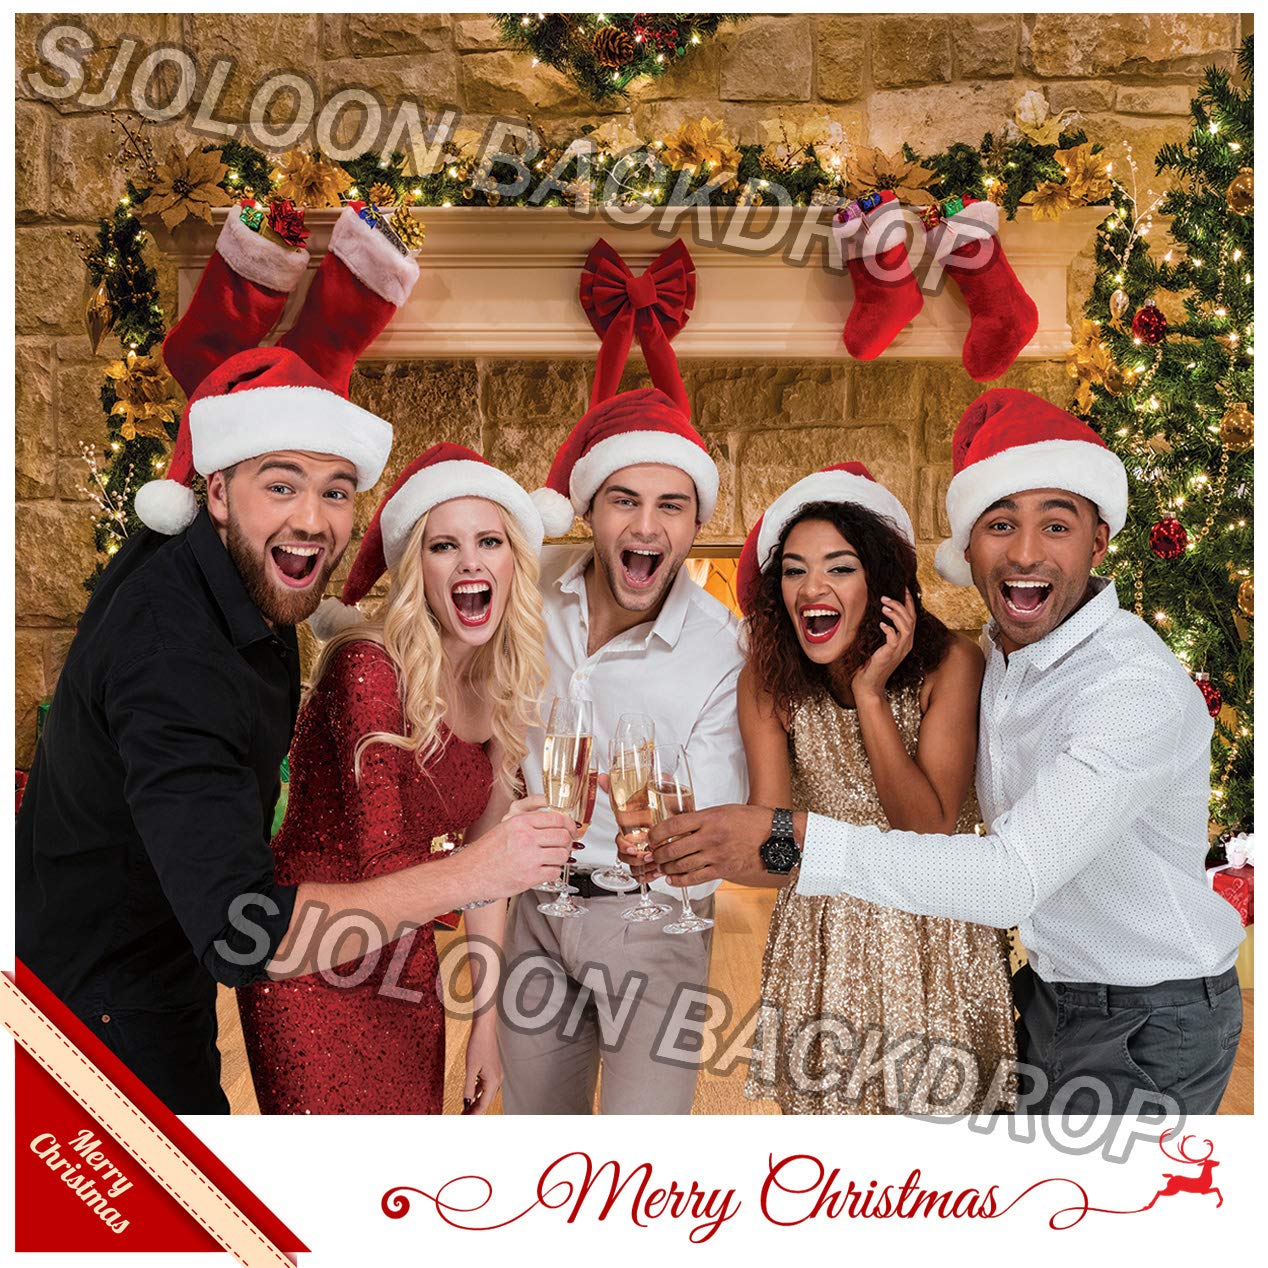 SJOLOON 10x8FT Christmas Photography Backdrops Child Christmas Fireplace Decoration Background for Photo Studio (11209)